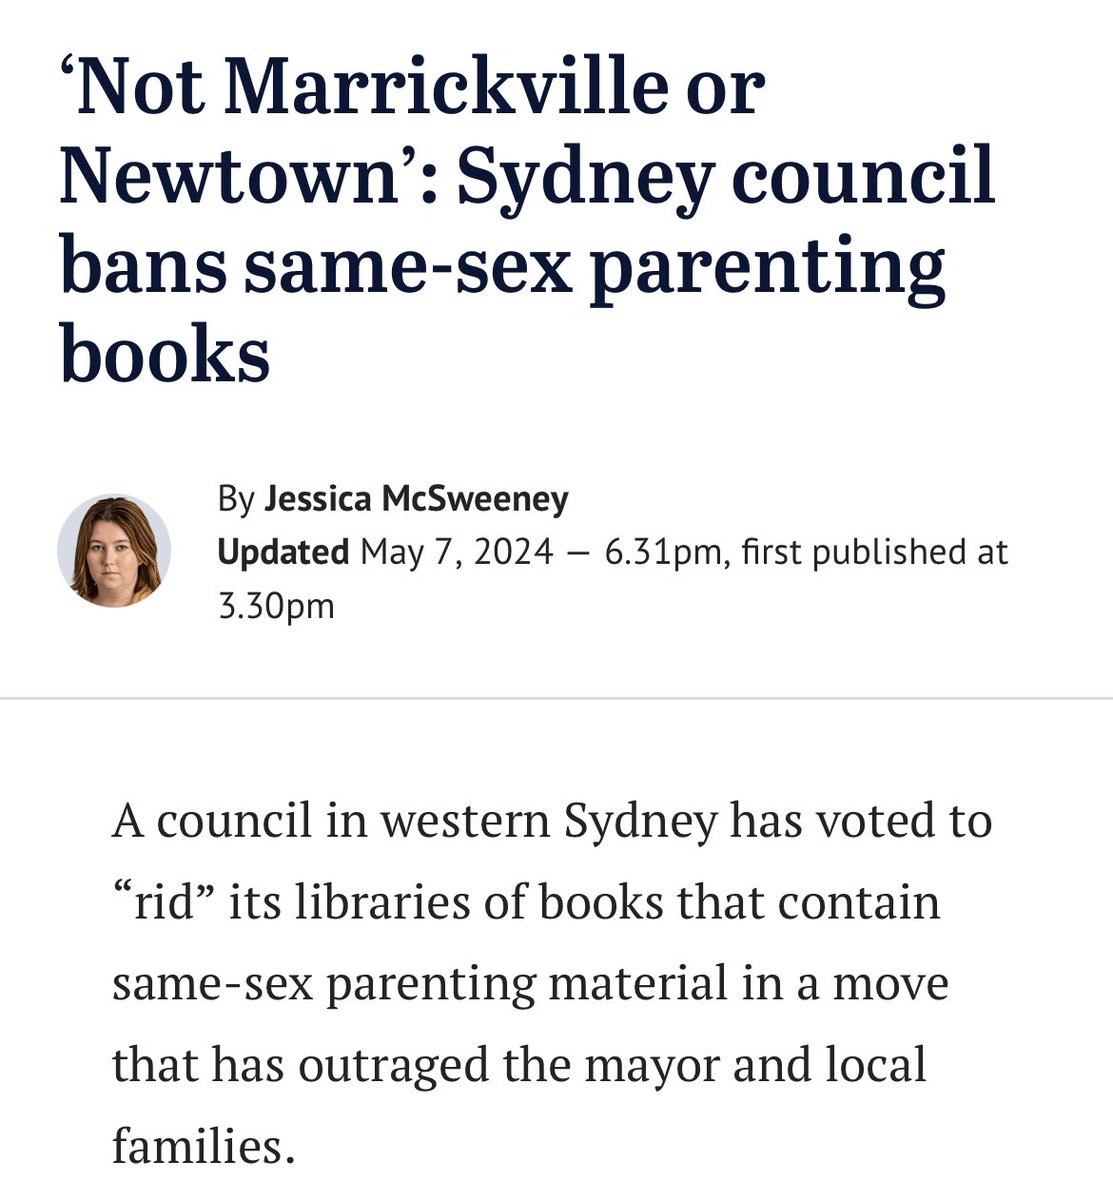 Gay + lesbian families exist everywhere in NSW. Book bans should exist nowhere. Stop being weirdly obsessed with how other ppl live their private lives and thinking you look tough punching down on minorities. It’s pathetic. Don’t like the books? Don’t read them.